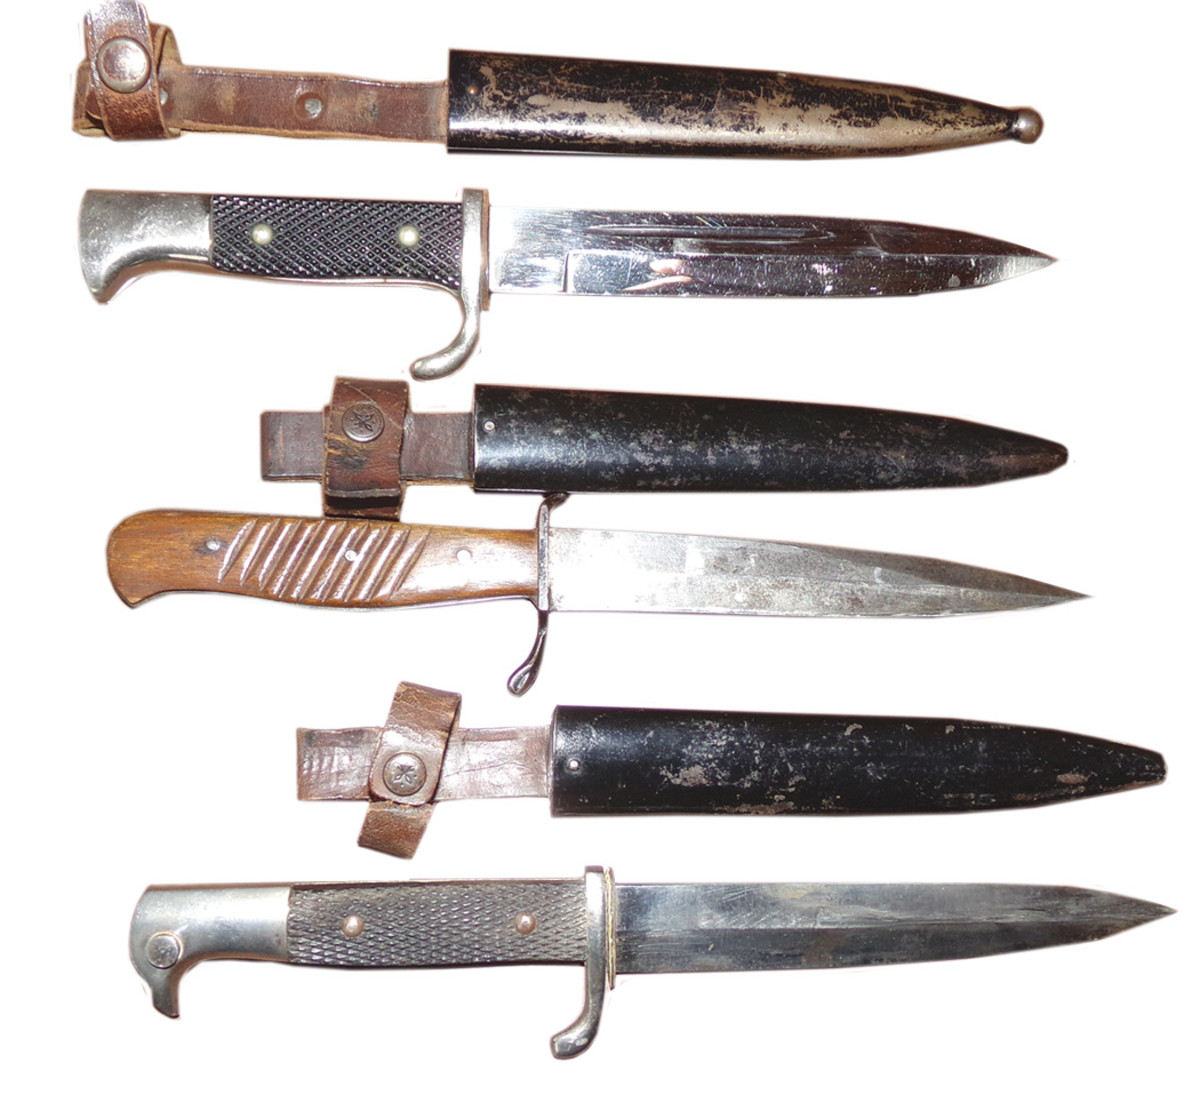 Though used for domestic chores such as eating, cooking and general repairs, the long sharp knives could, as a last resort, be used to kill an enemy soldier in hand-to-hand combat.